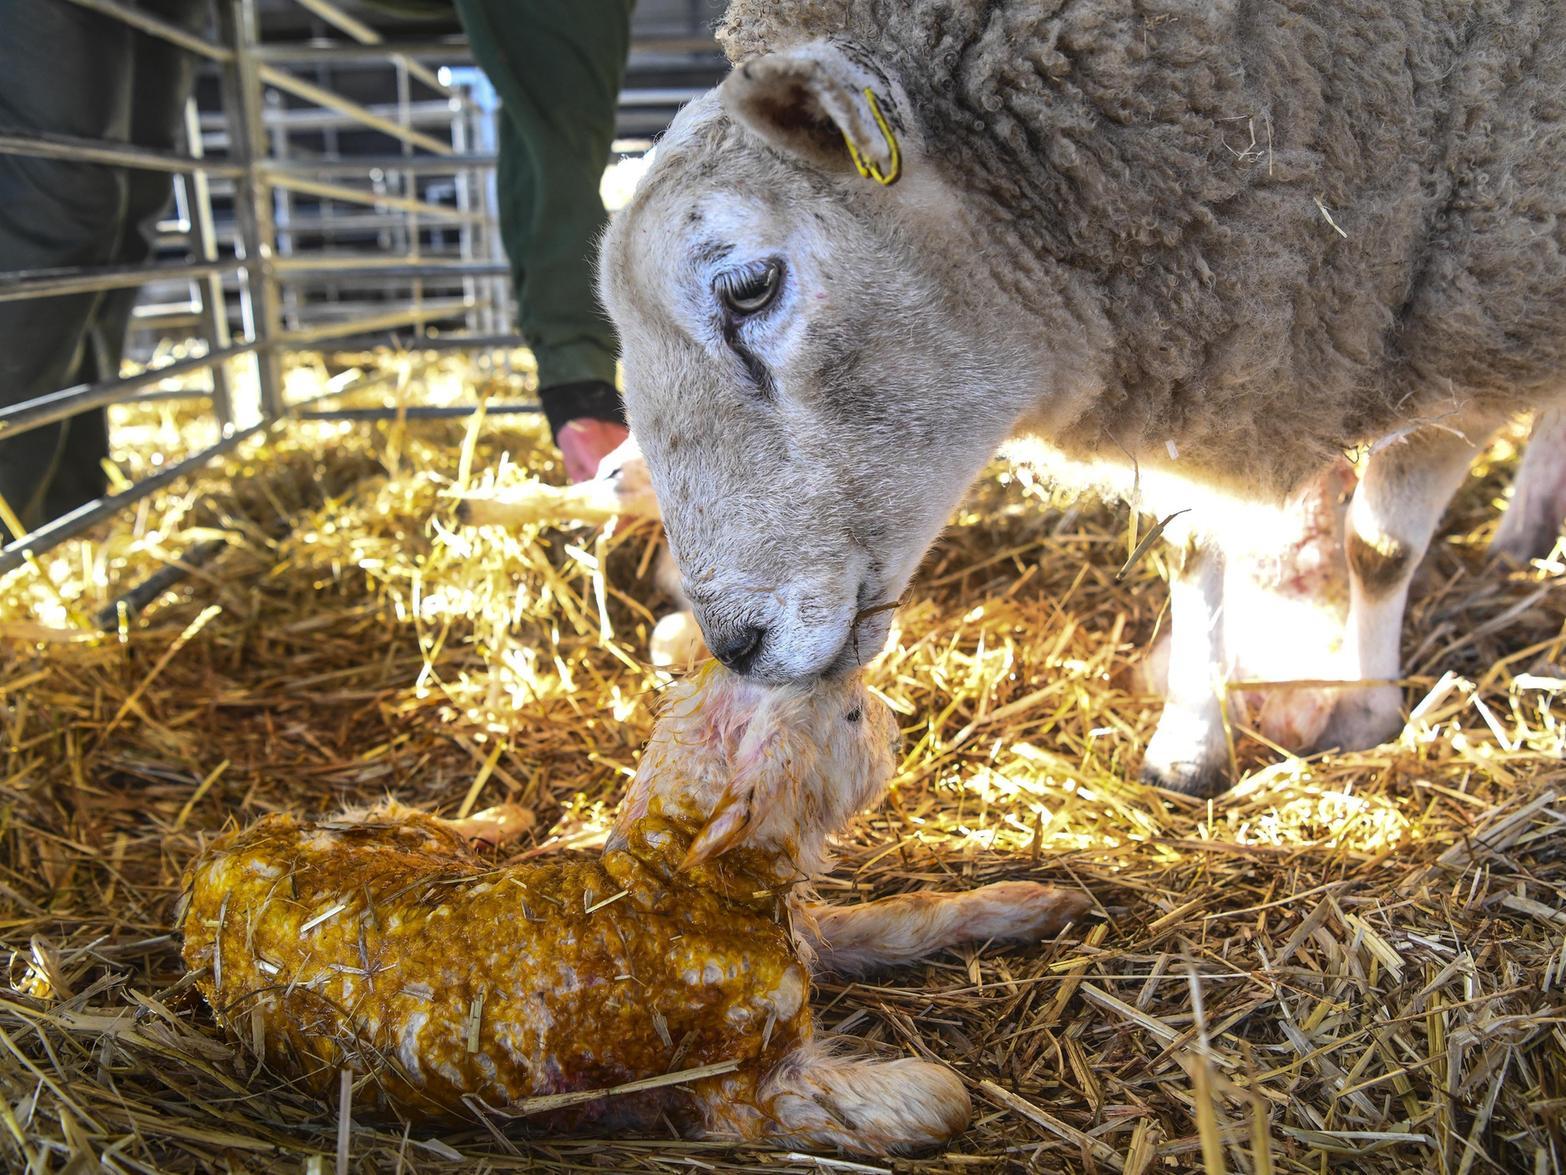 Lambs are born around four and a half months after the ewe falls pregnant, which can start as early as December and go on to as late as June.